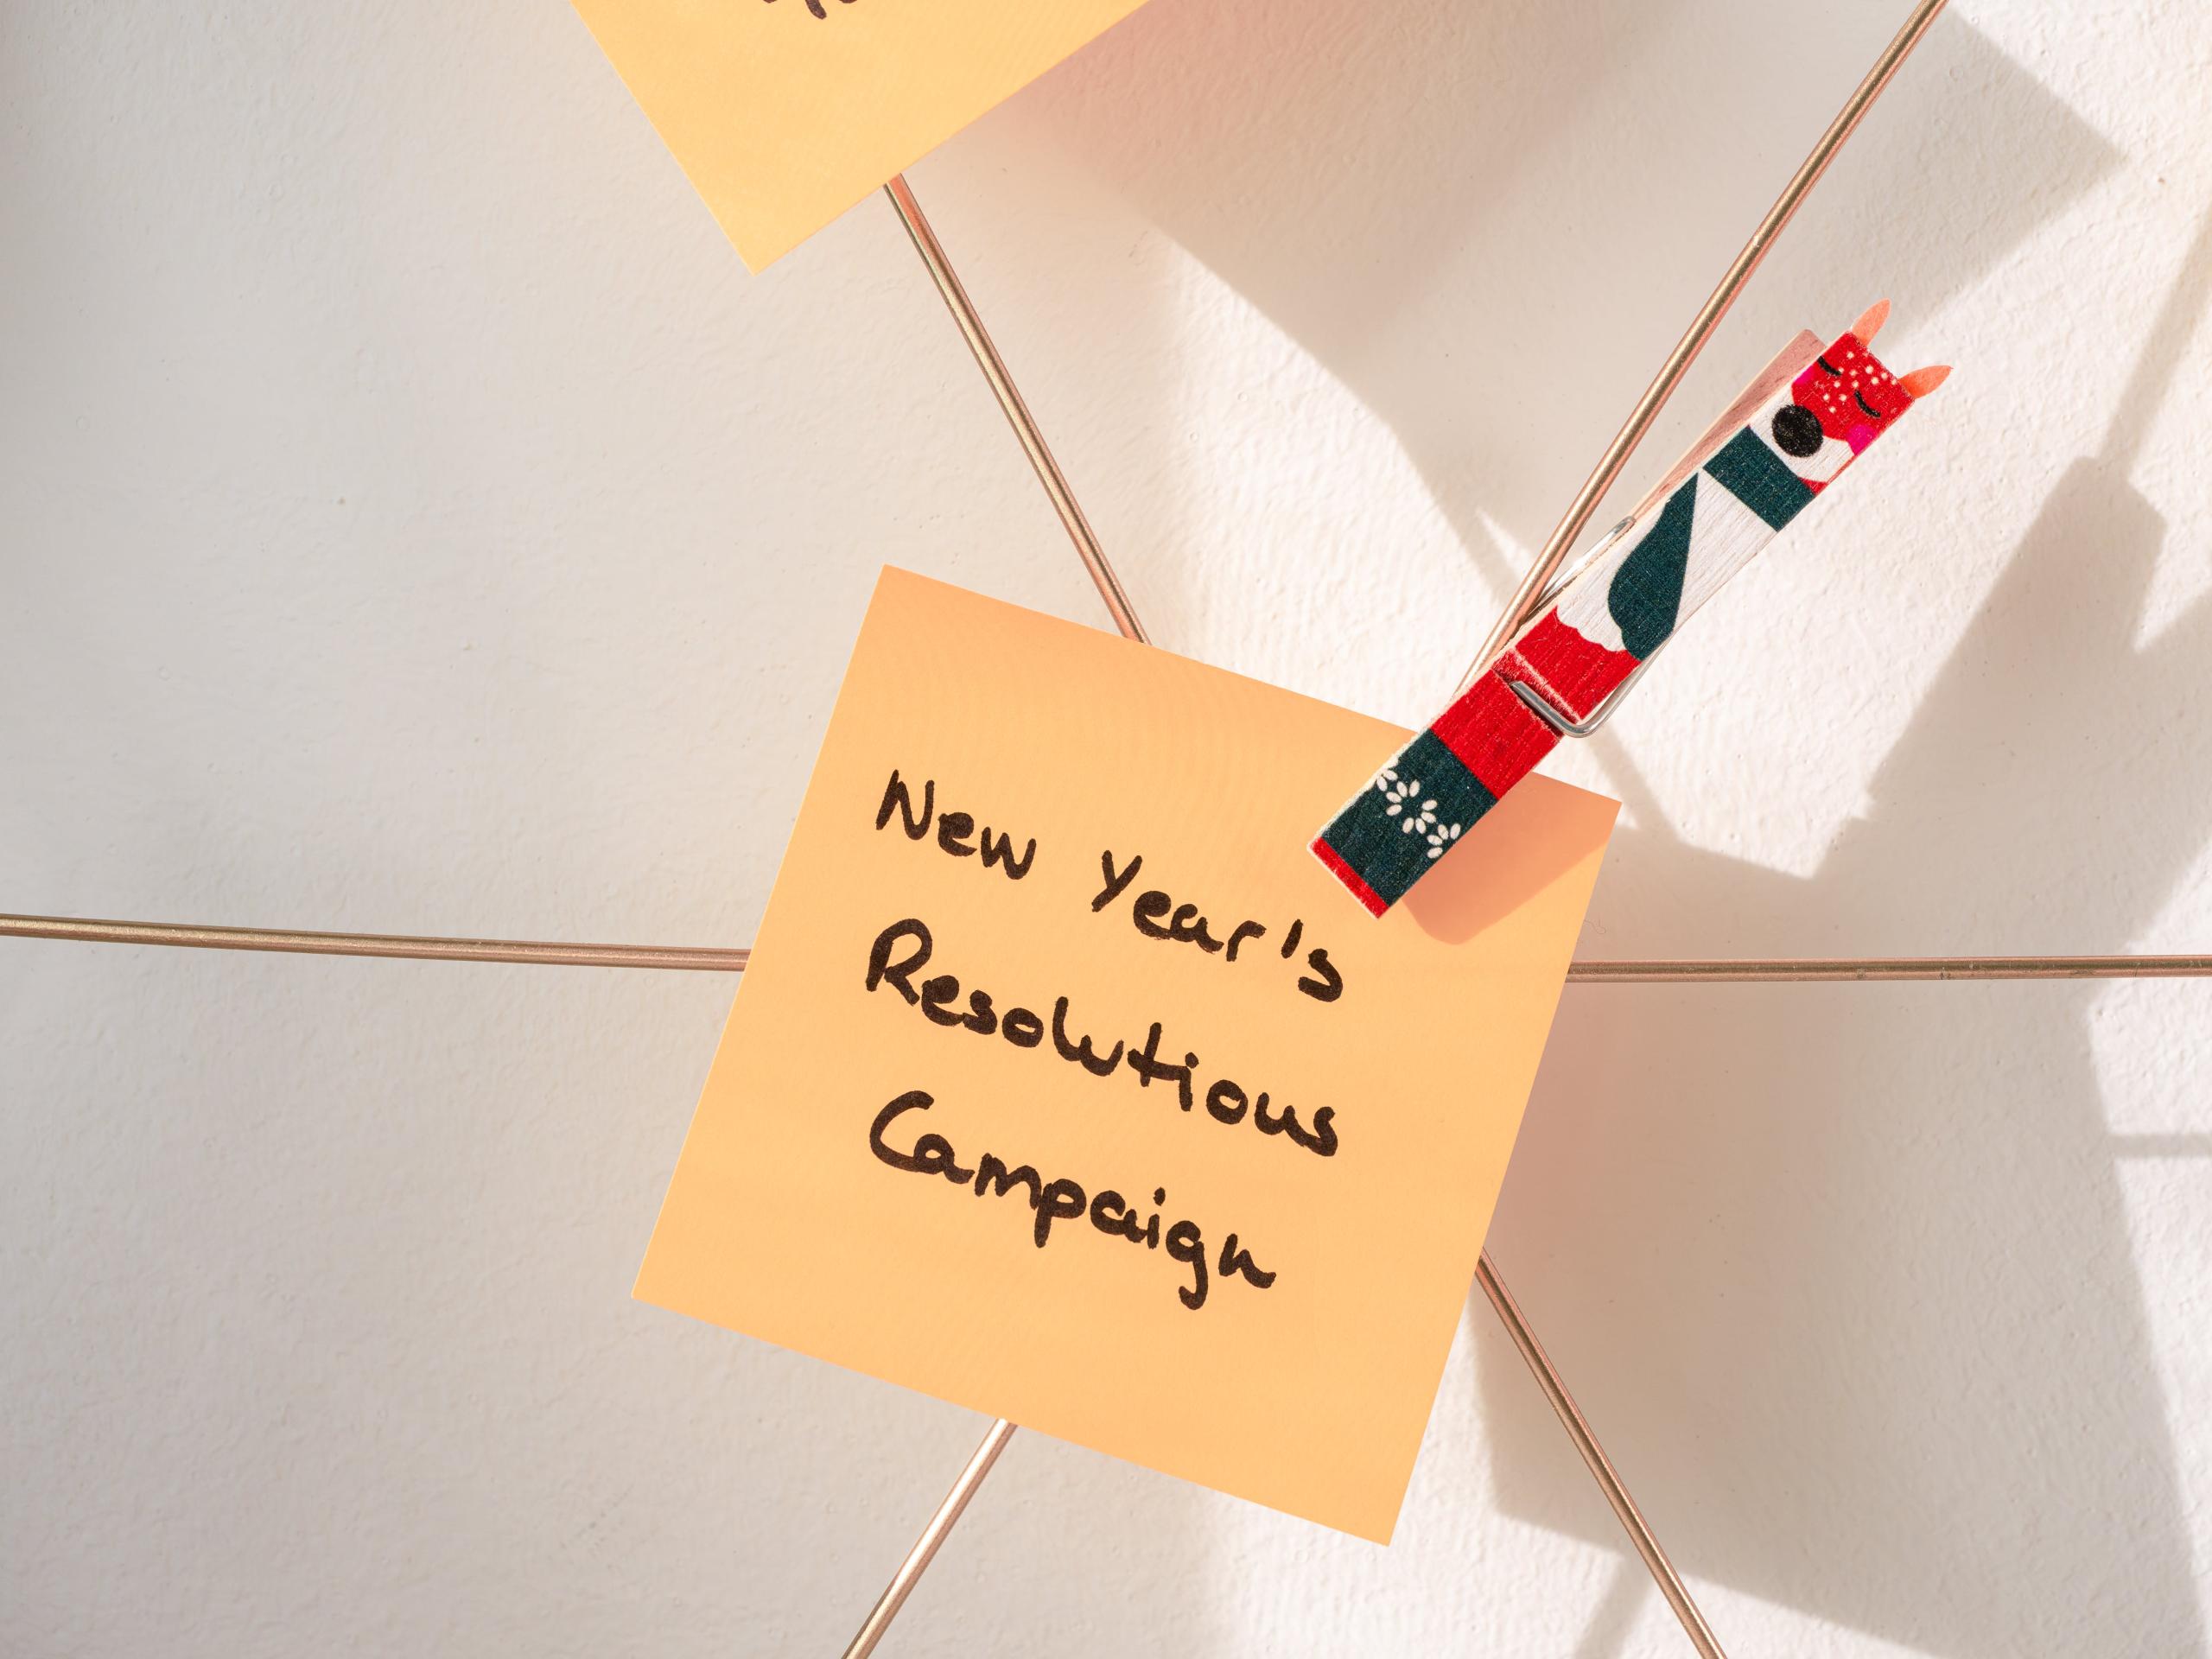 New Year's resolutions (Photo by Pexels.com)